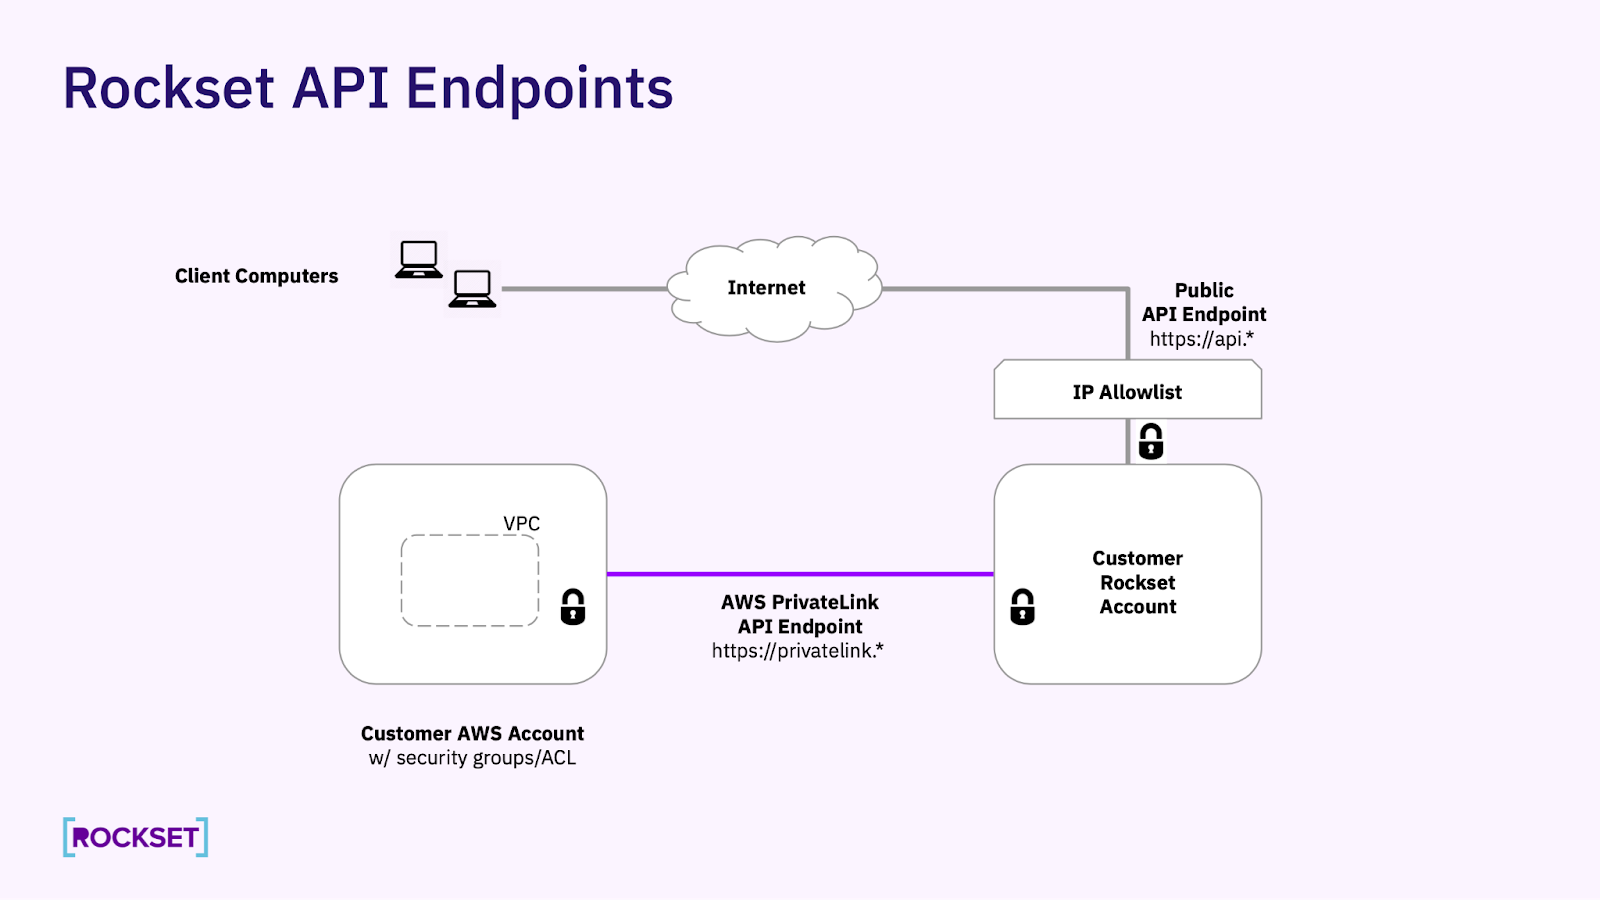 Connectivity diagram where both AWS PrivateLink API endpoint and the public API endpoint are available